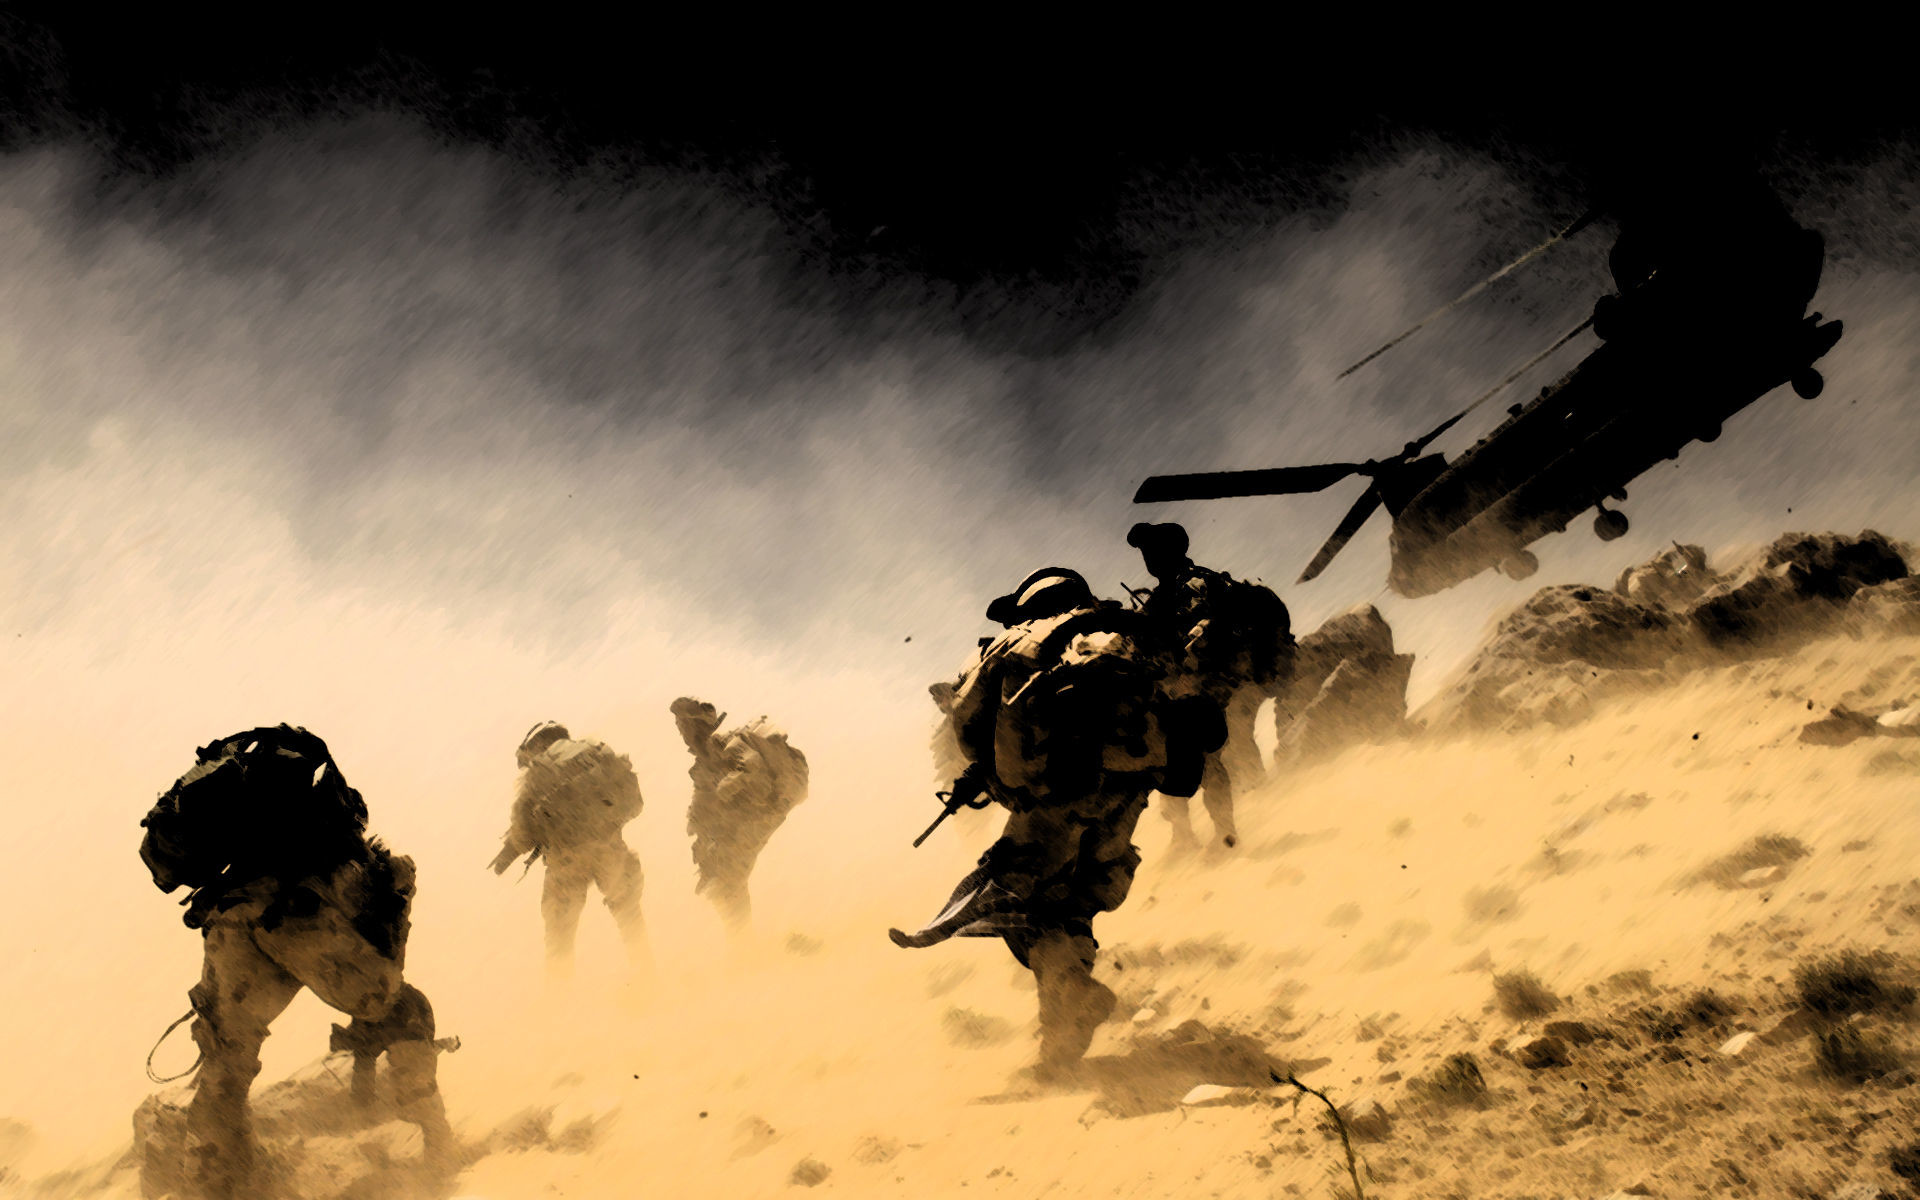 us army widescreen high resolution wallpaper download us army images .